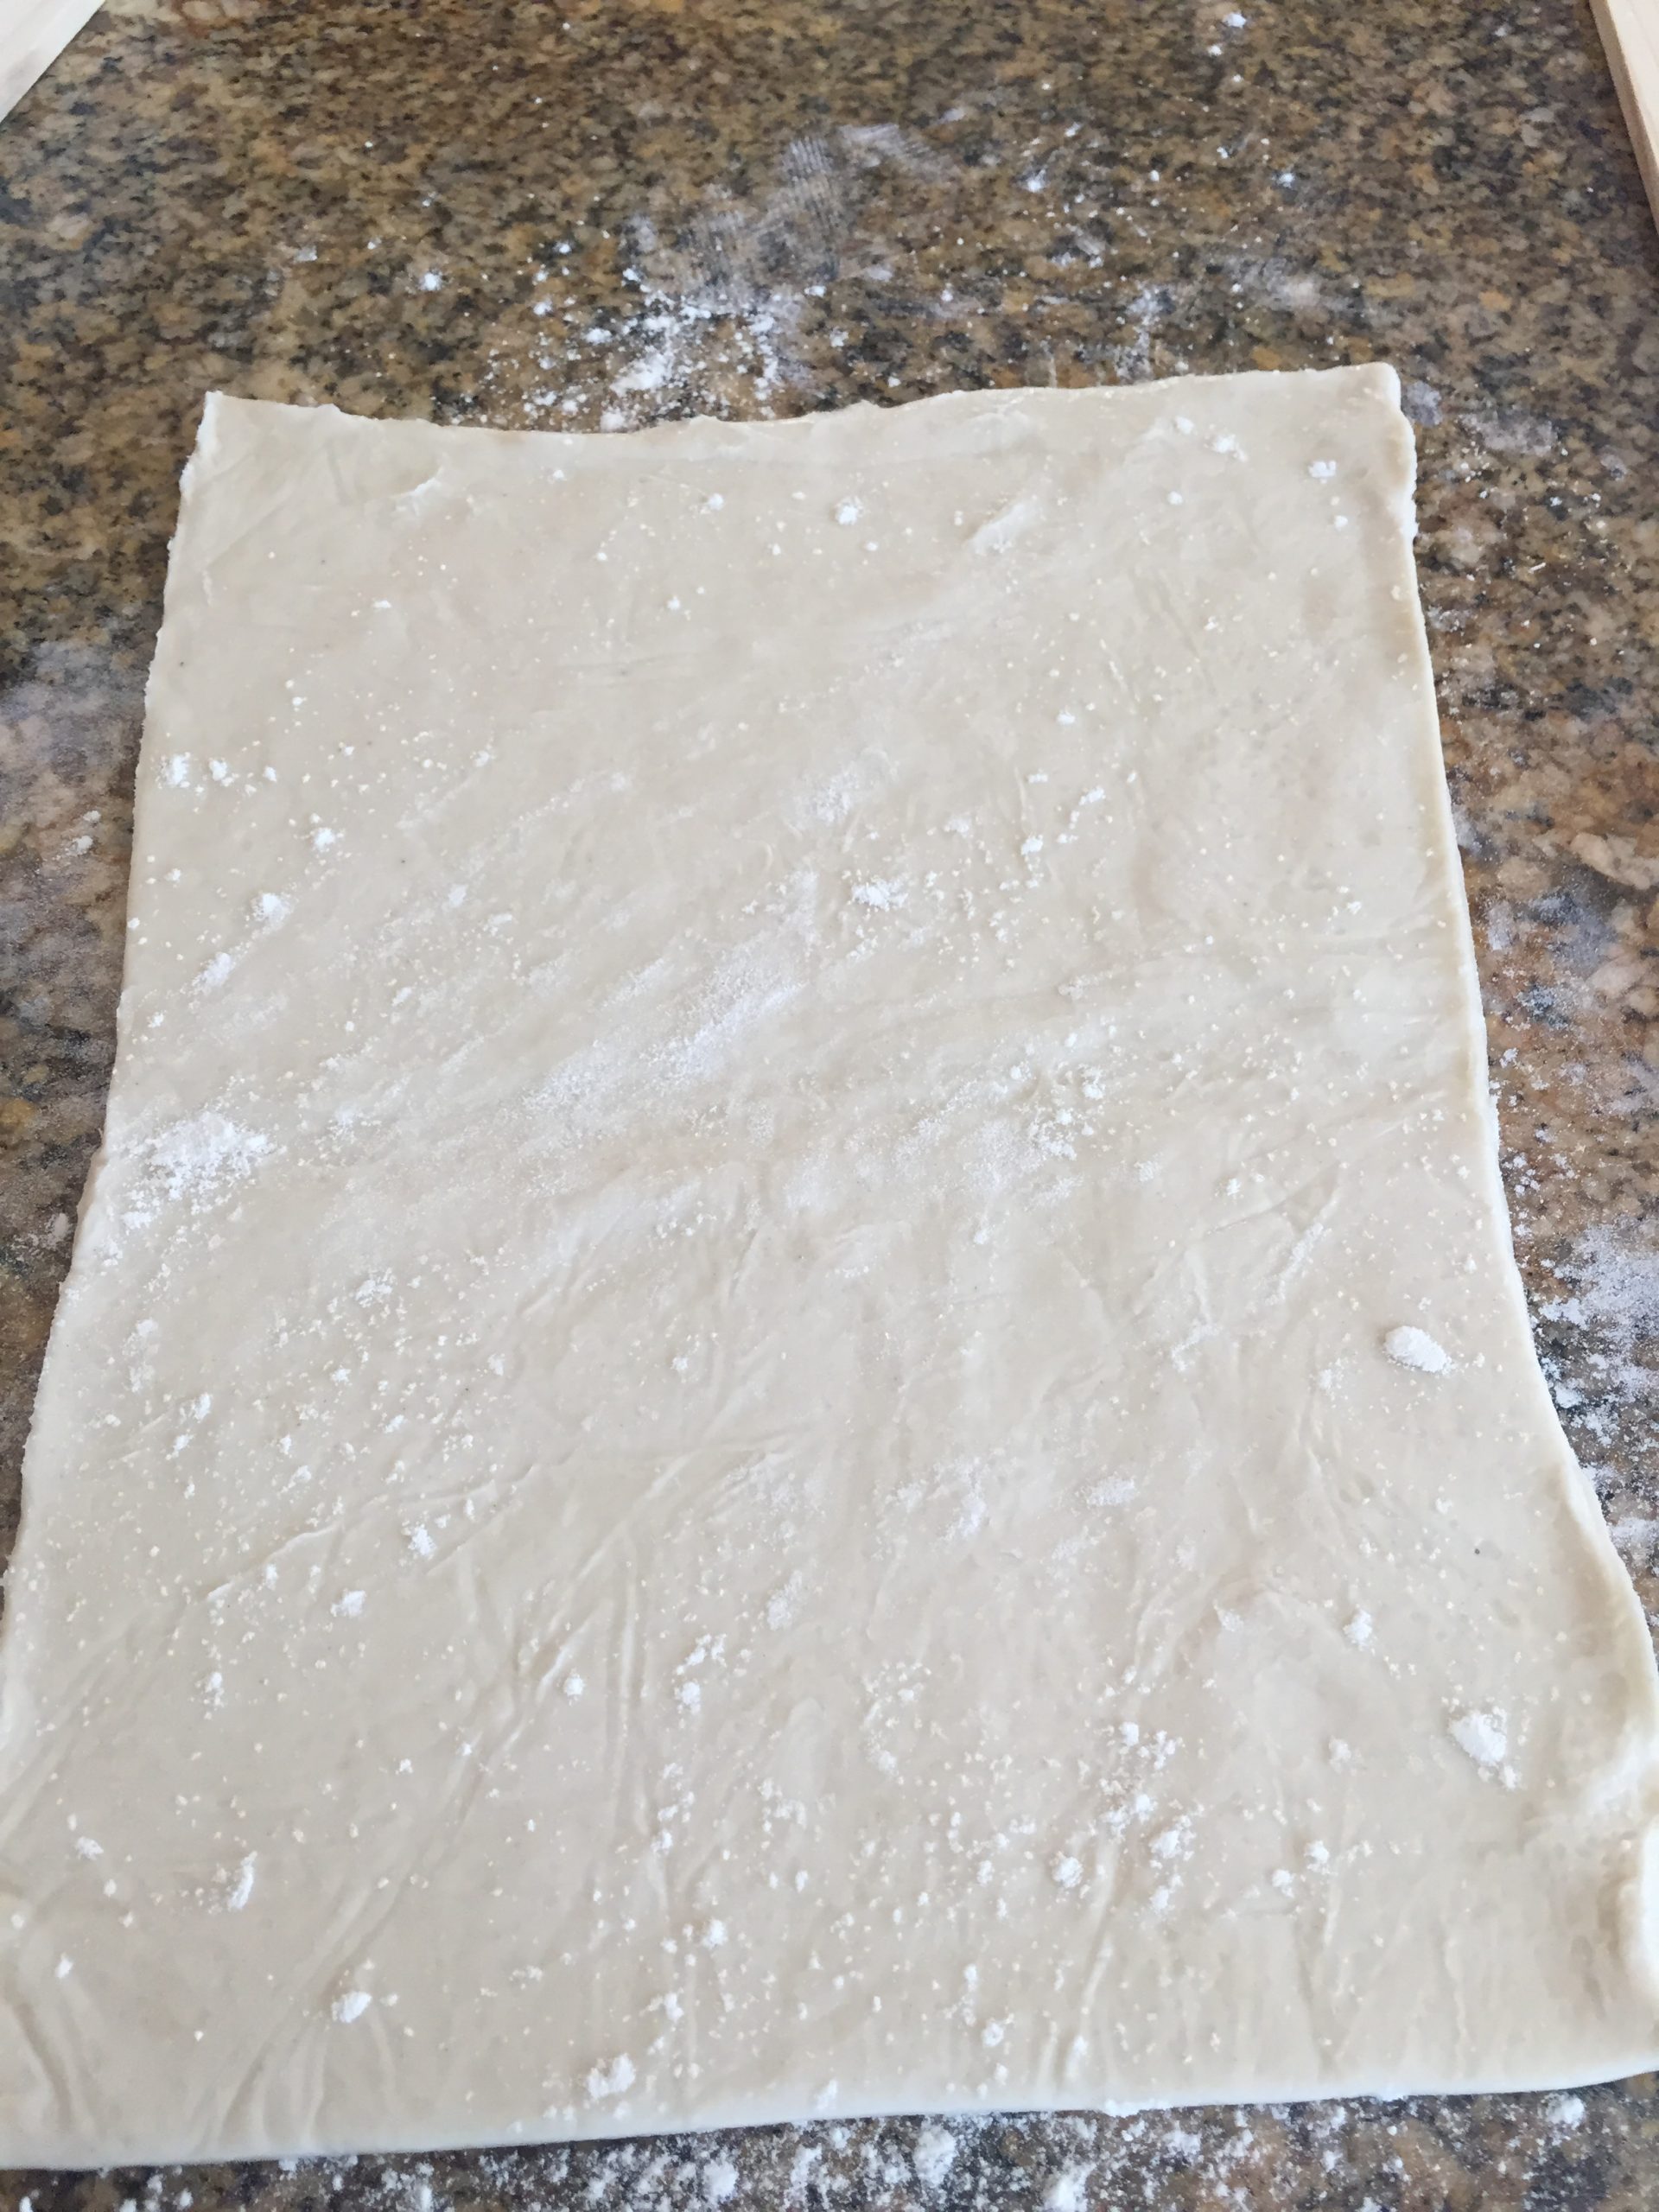 Well floured, cold surface for rolling puff pastry